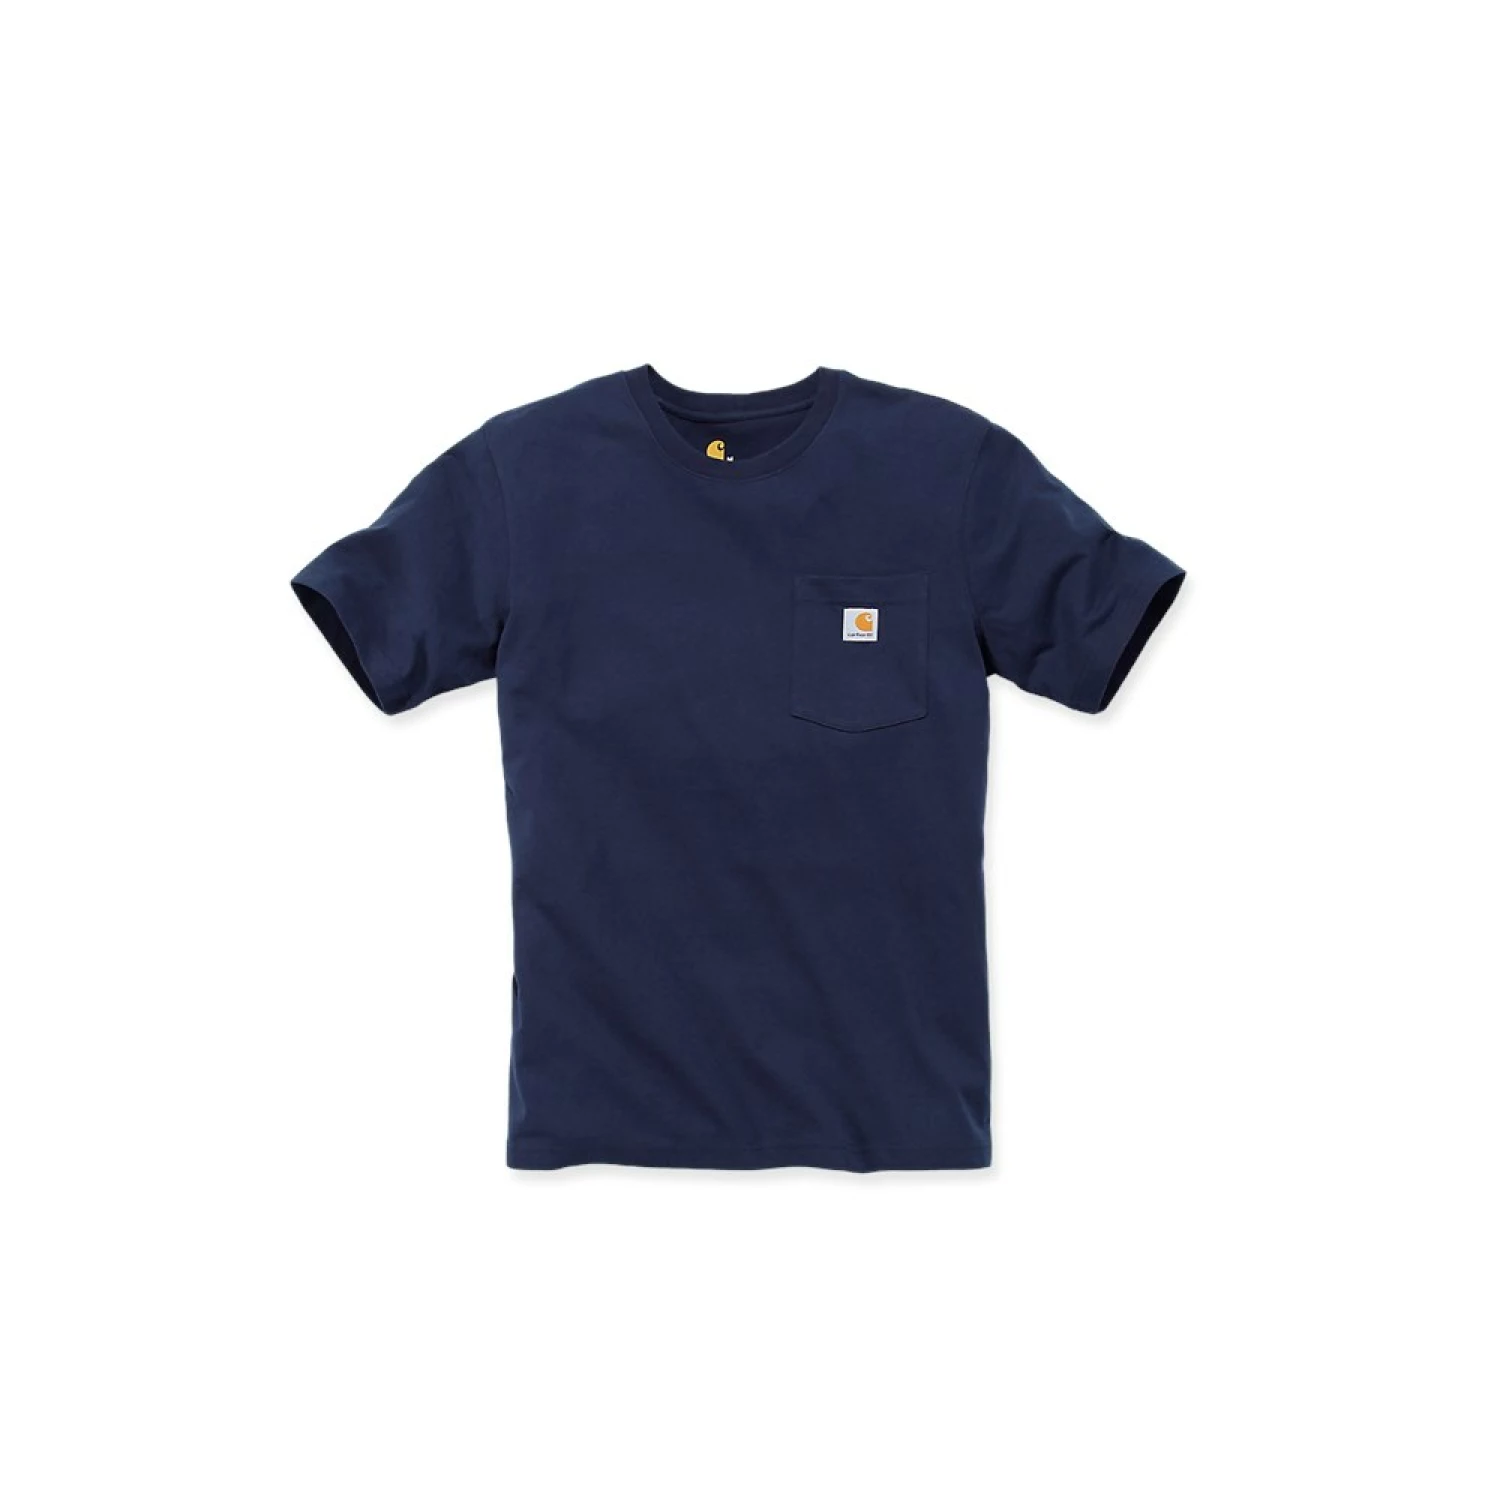 Carhartt 103296 Workwear Pocket T-Shirt - Relaxed Fit - Navy - XL-image